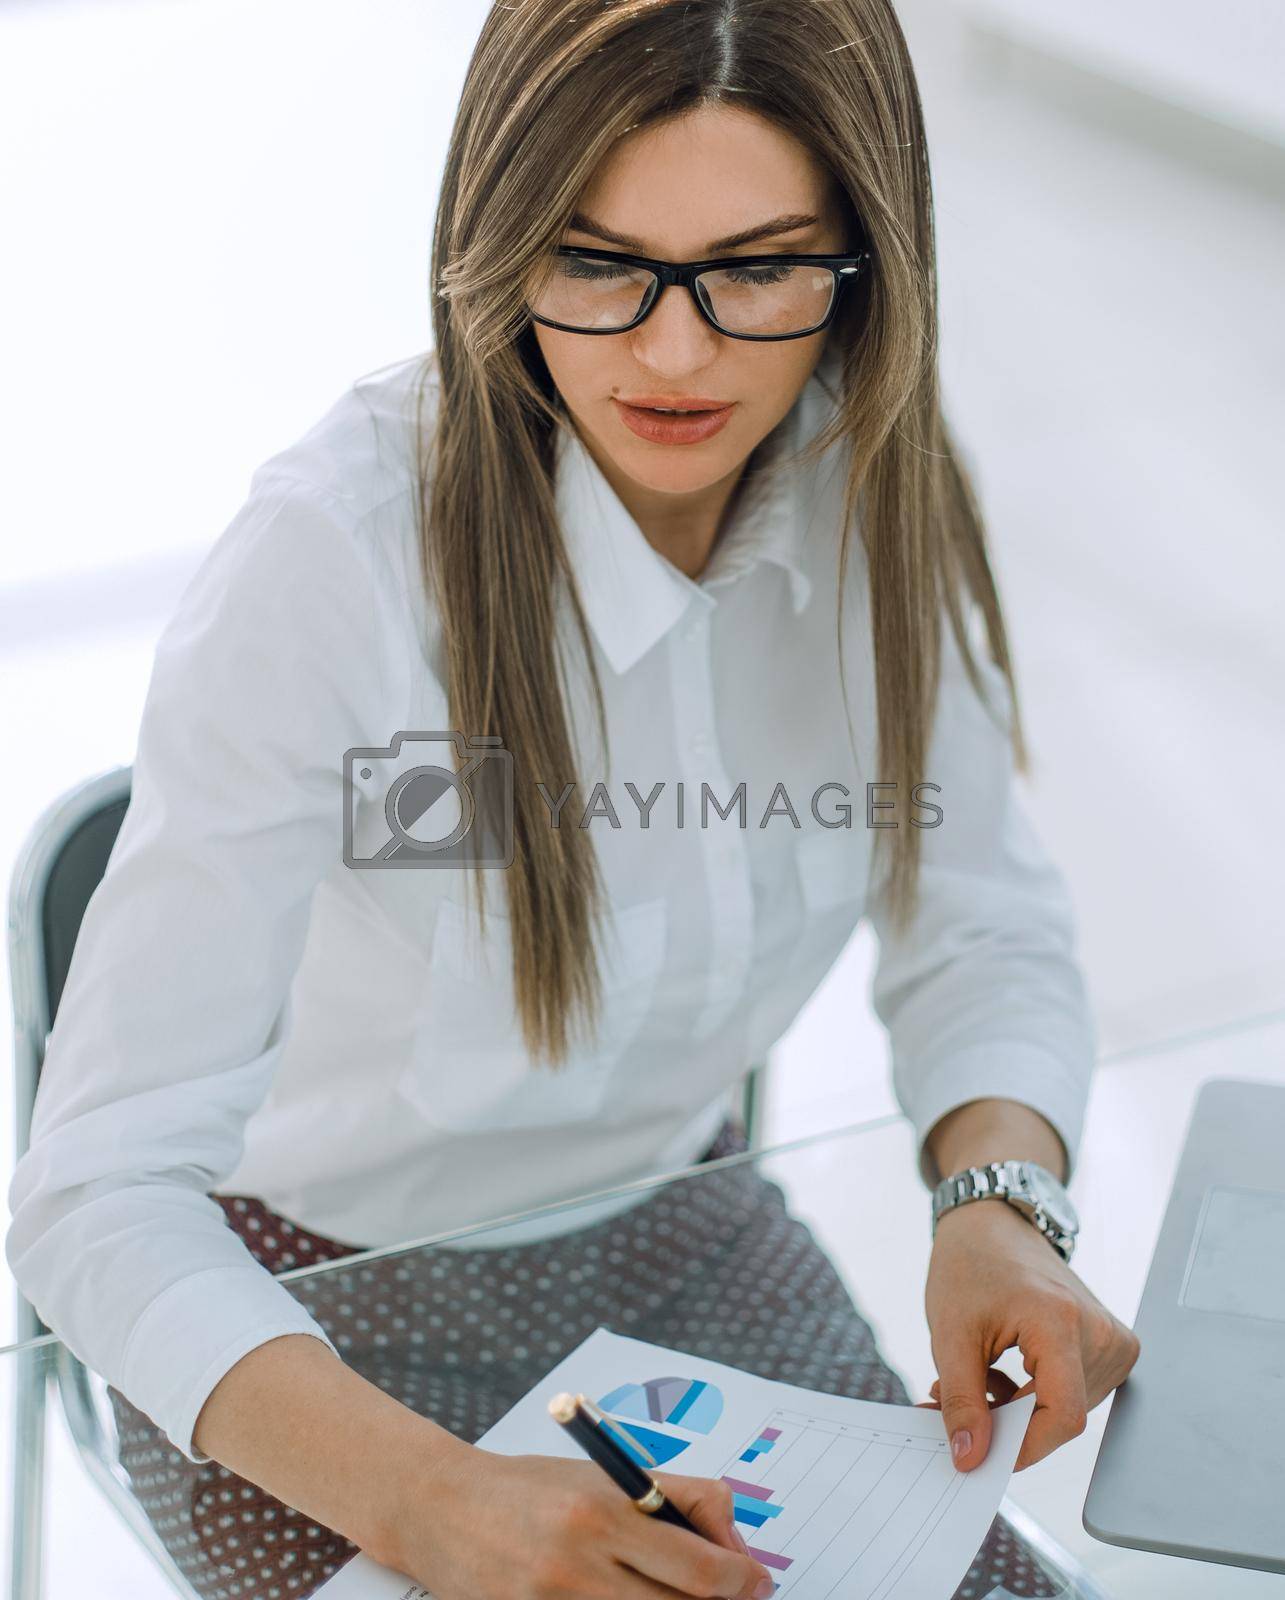 Royalty free image of business woman checking financial documents. by asdf